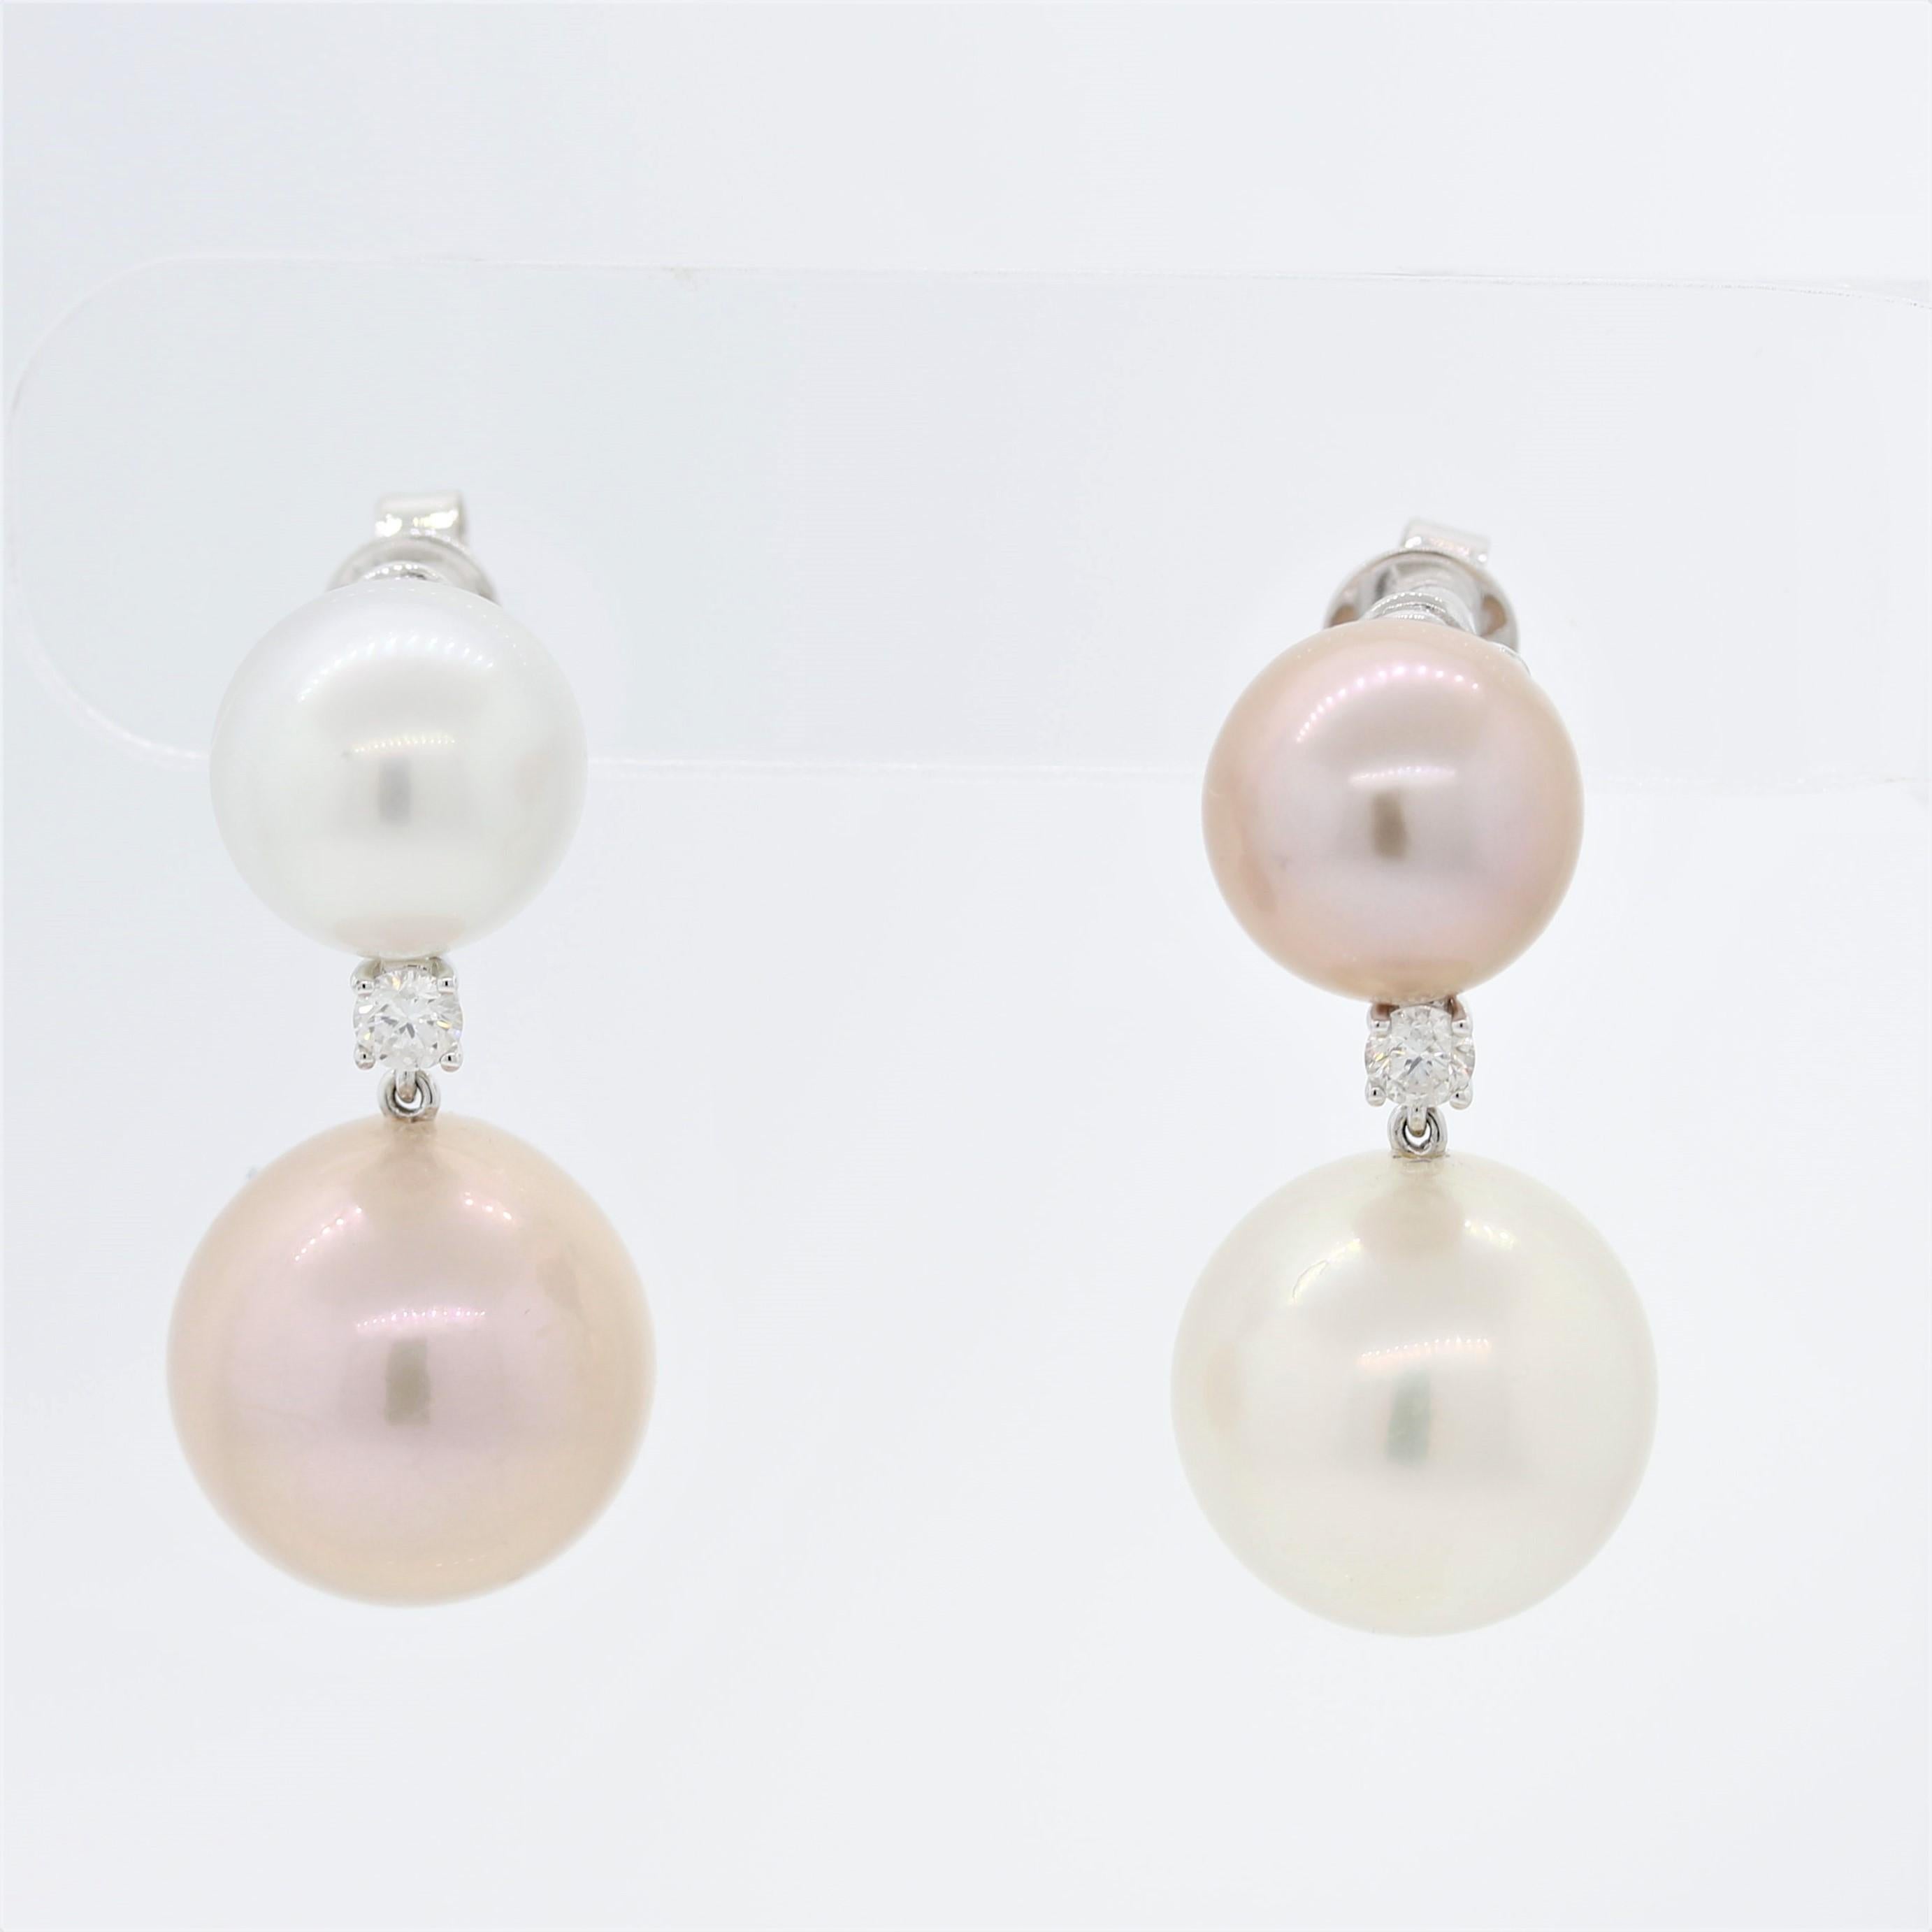 A pair of South Sea earrings featuring white & pink colors! The two larger drop pearls measure about 16mm each while the smaller pearls on the top are about 12mm each. Set inversely, pink and white, it gives the earrings a stylish designer look.